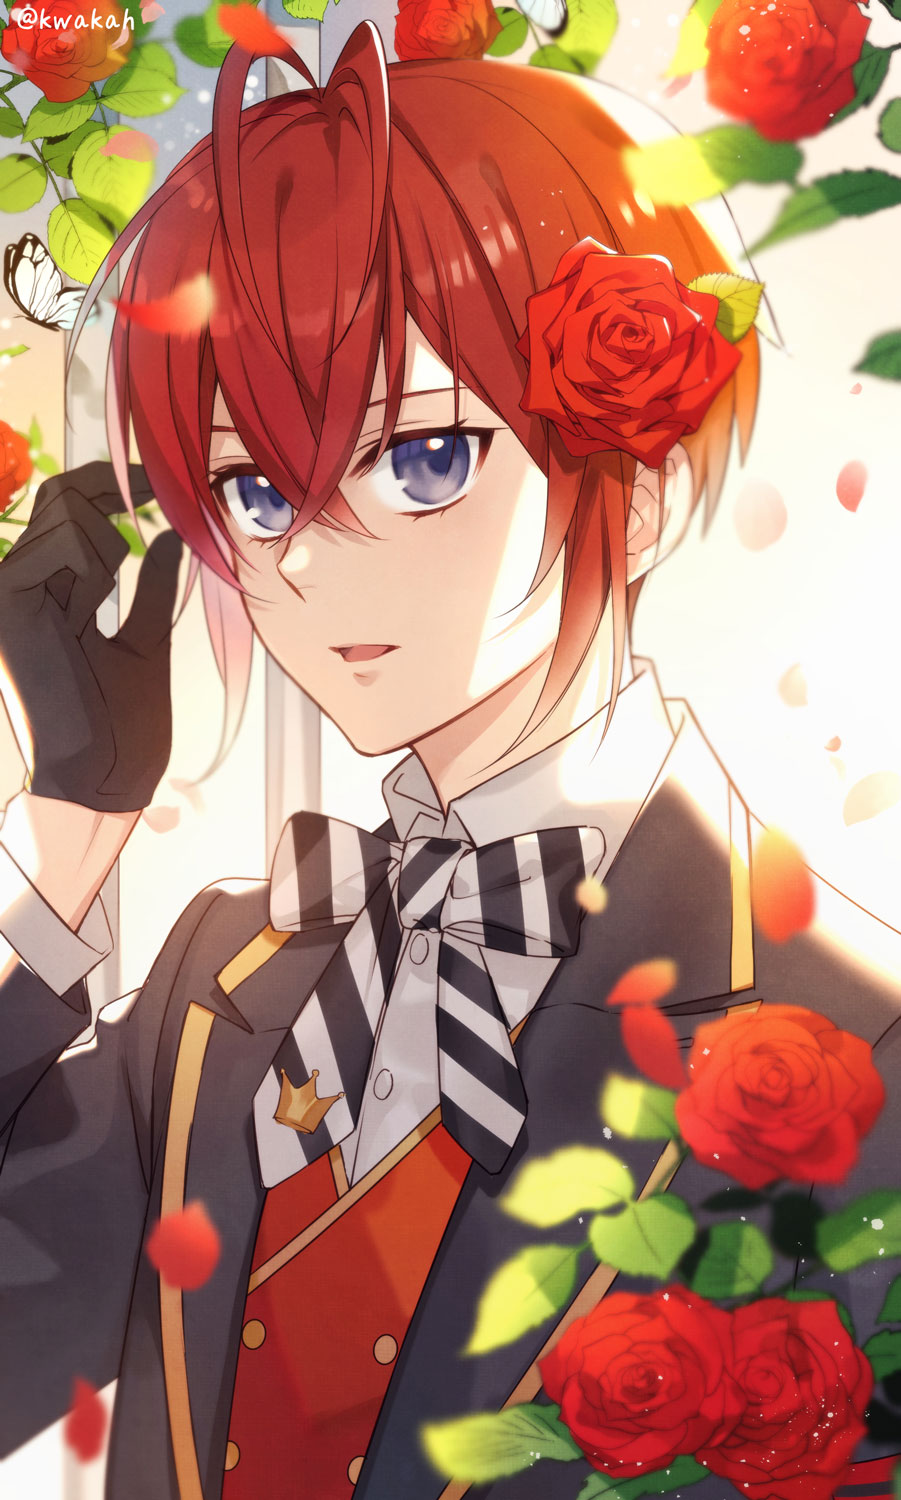 1boy antenna_hair black_gloves blue_eyes flower gloves hair_between_eyes highres jacket kwakah long_sleeves looking_at_viewer male_focus open_mouth redhead riddle_rosehearts rose short_hair simple_background smile solo twisted_wonderland